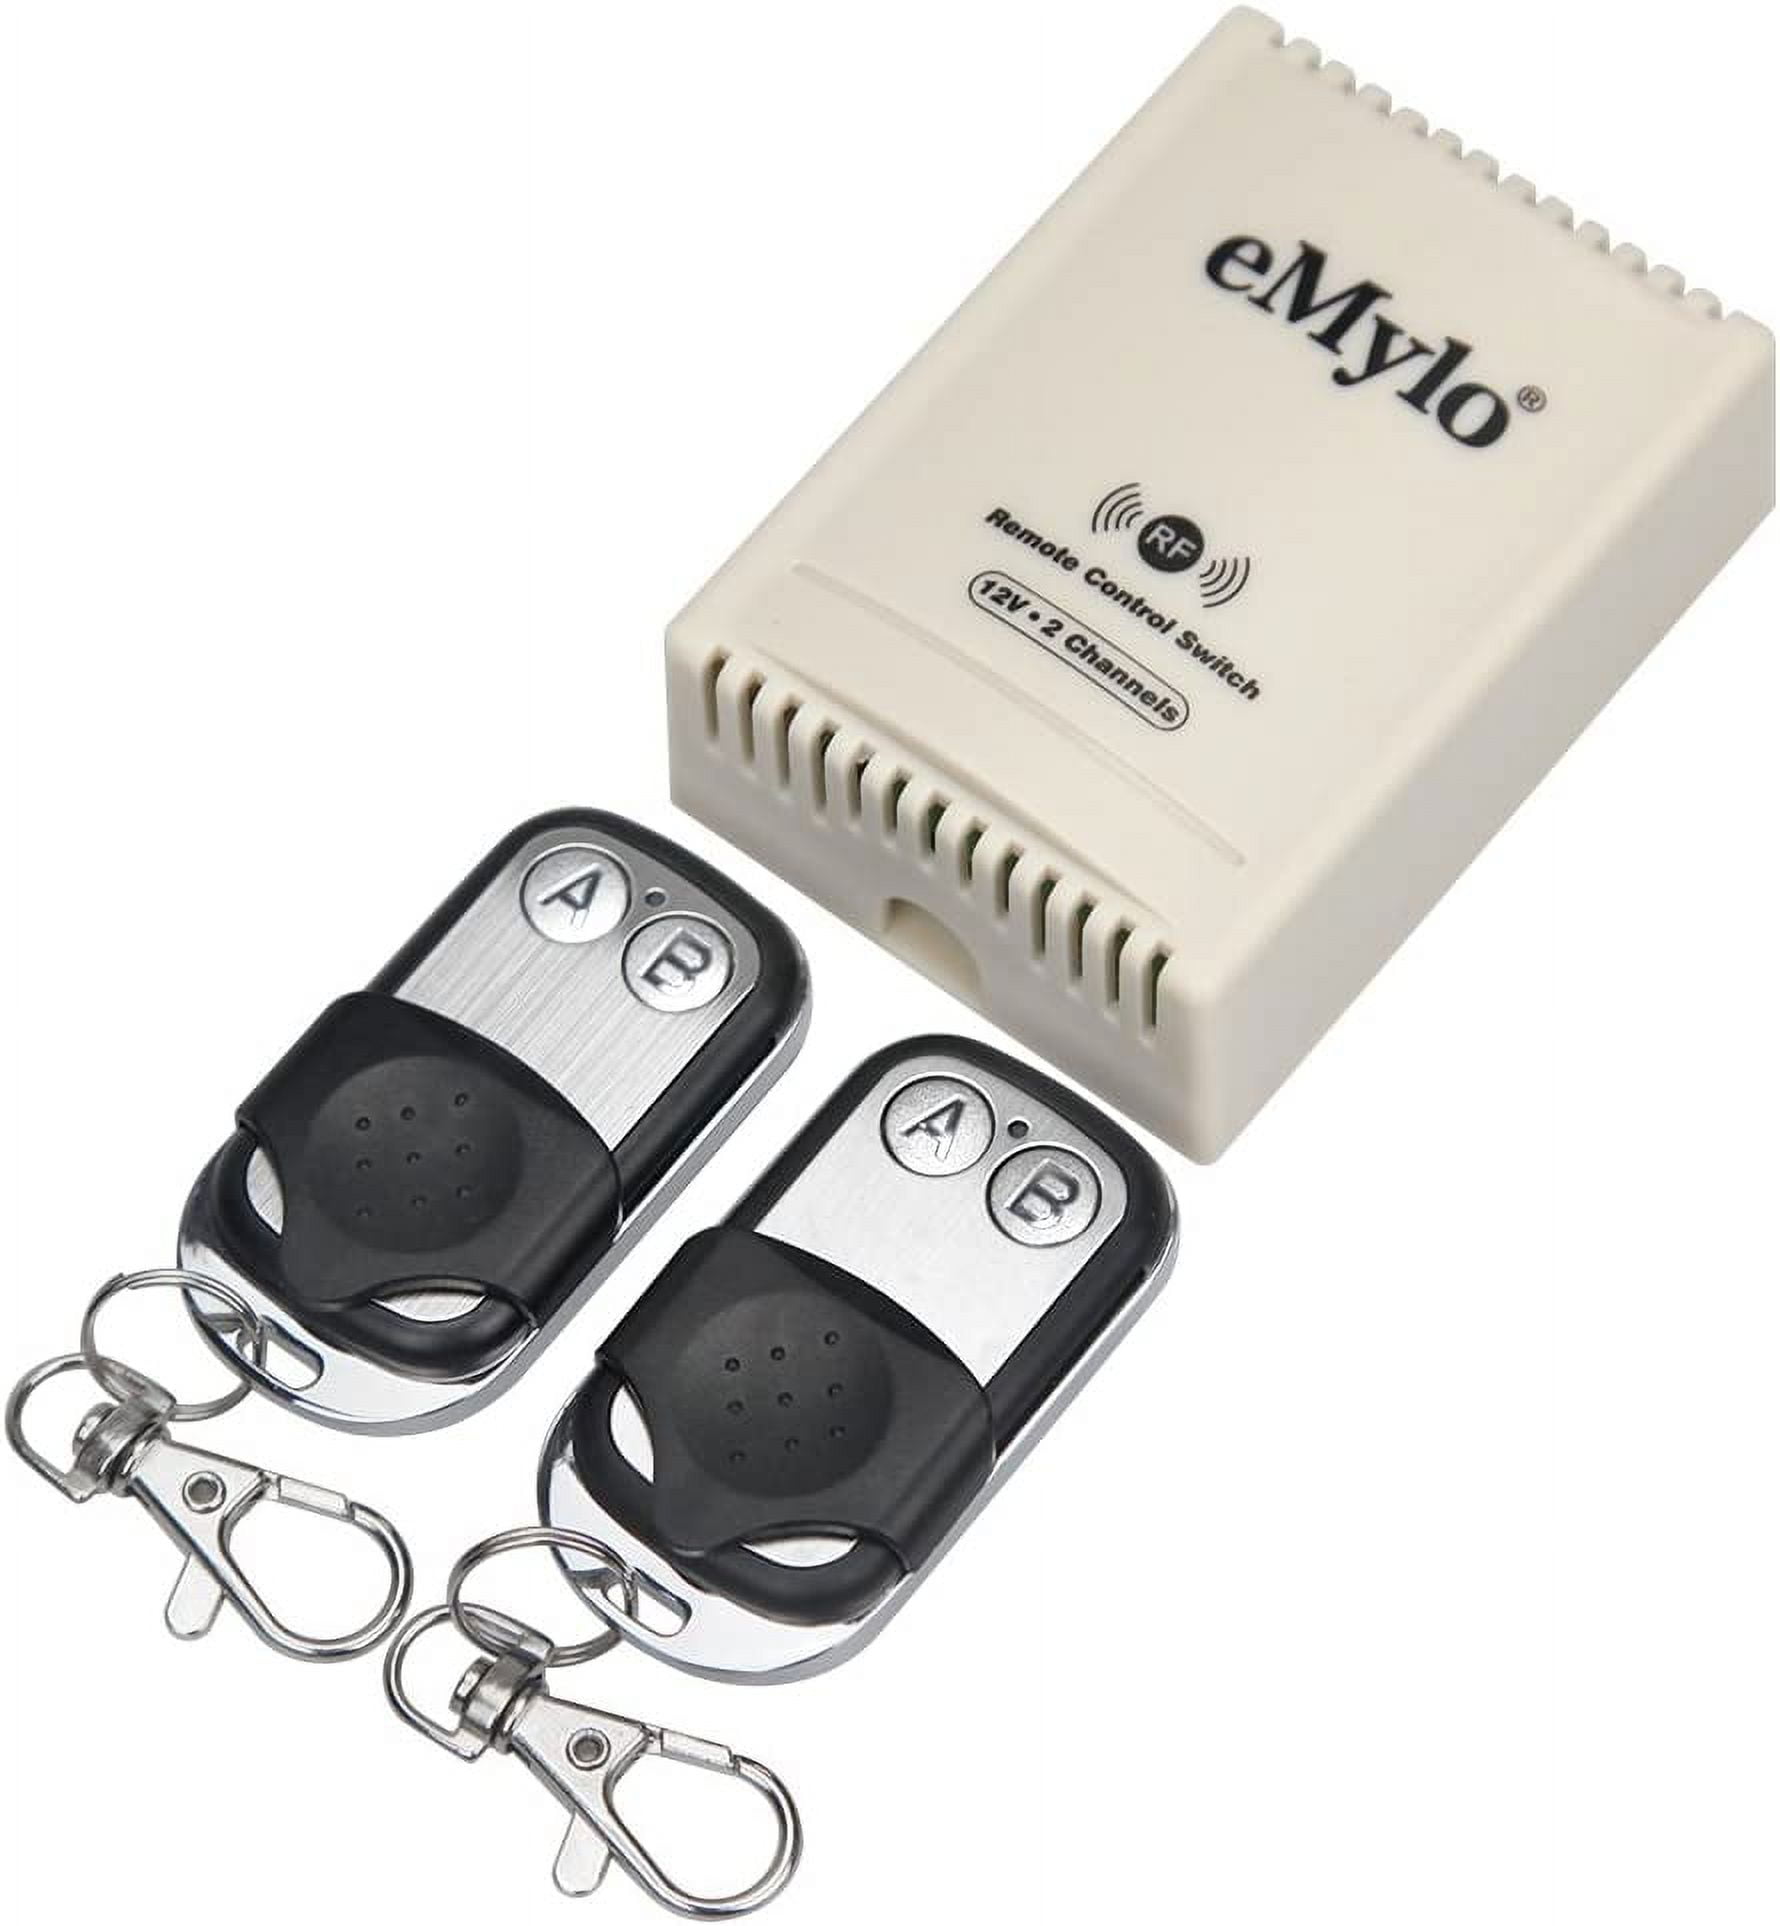 eMylo Remote Control Switch DC 12V Wireless Momentary Switch 1 Channel  Wireless Relay Transmitter with Receiver for Home Use